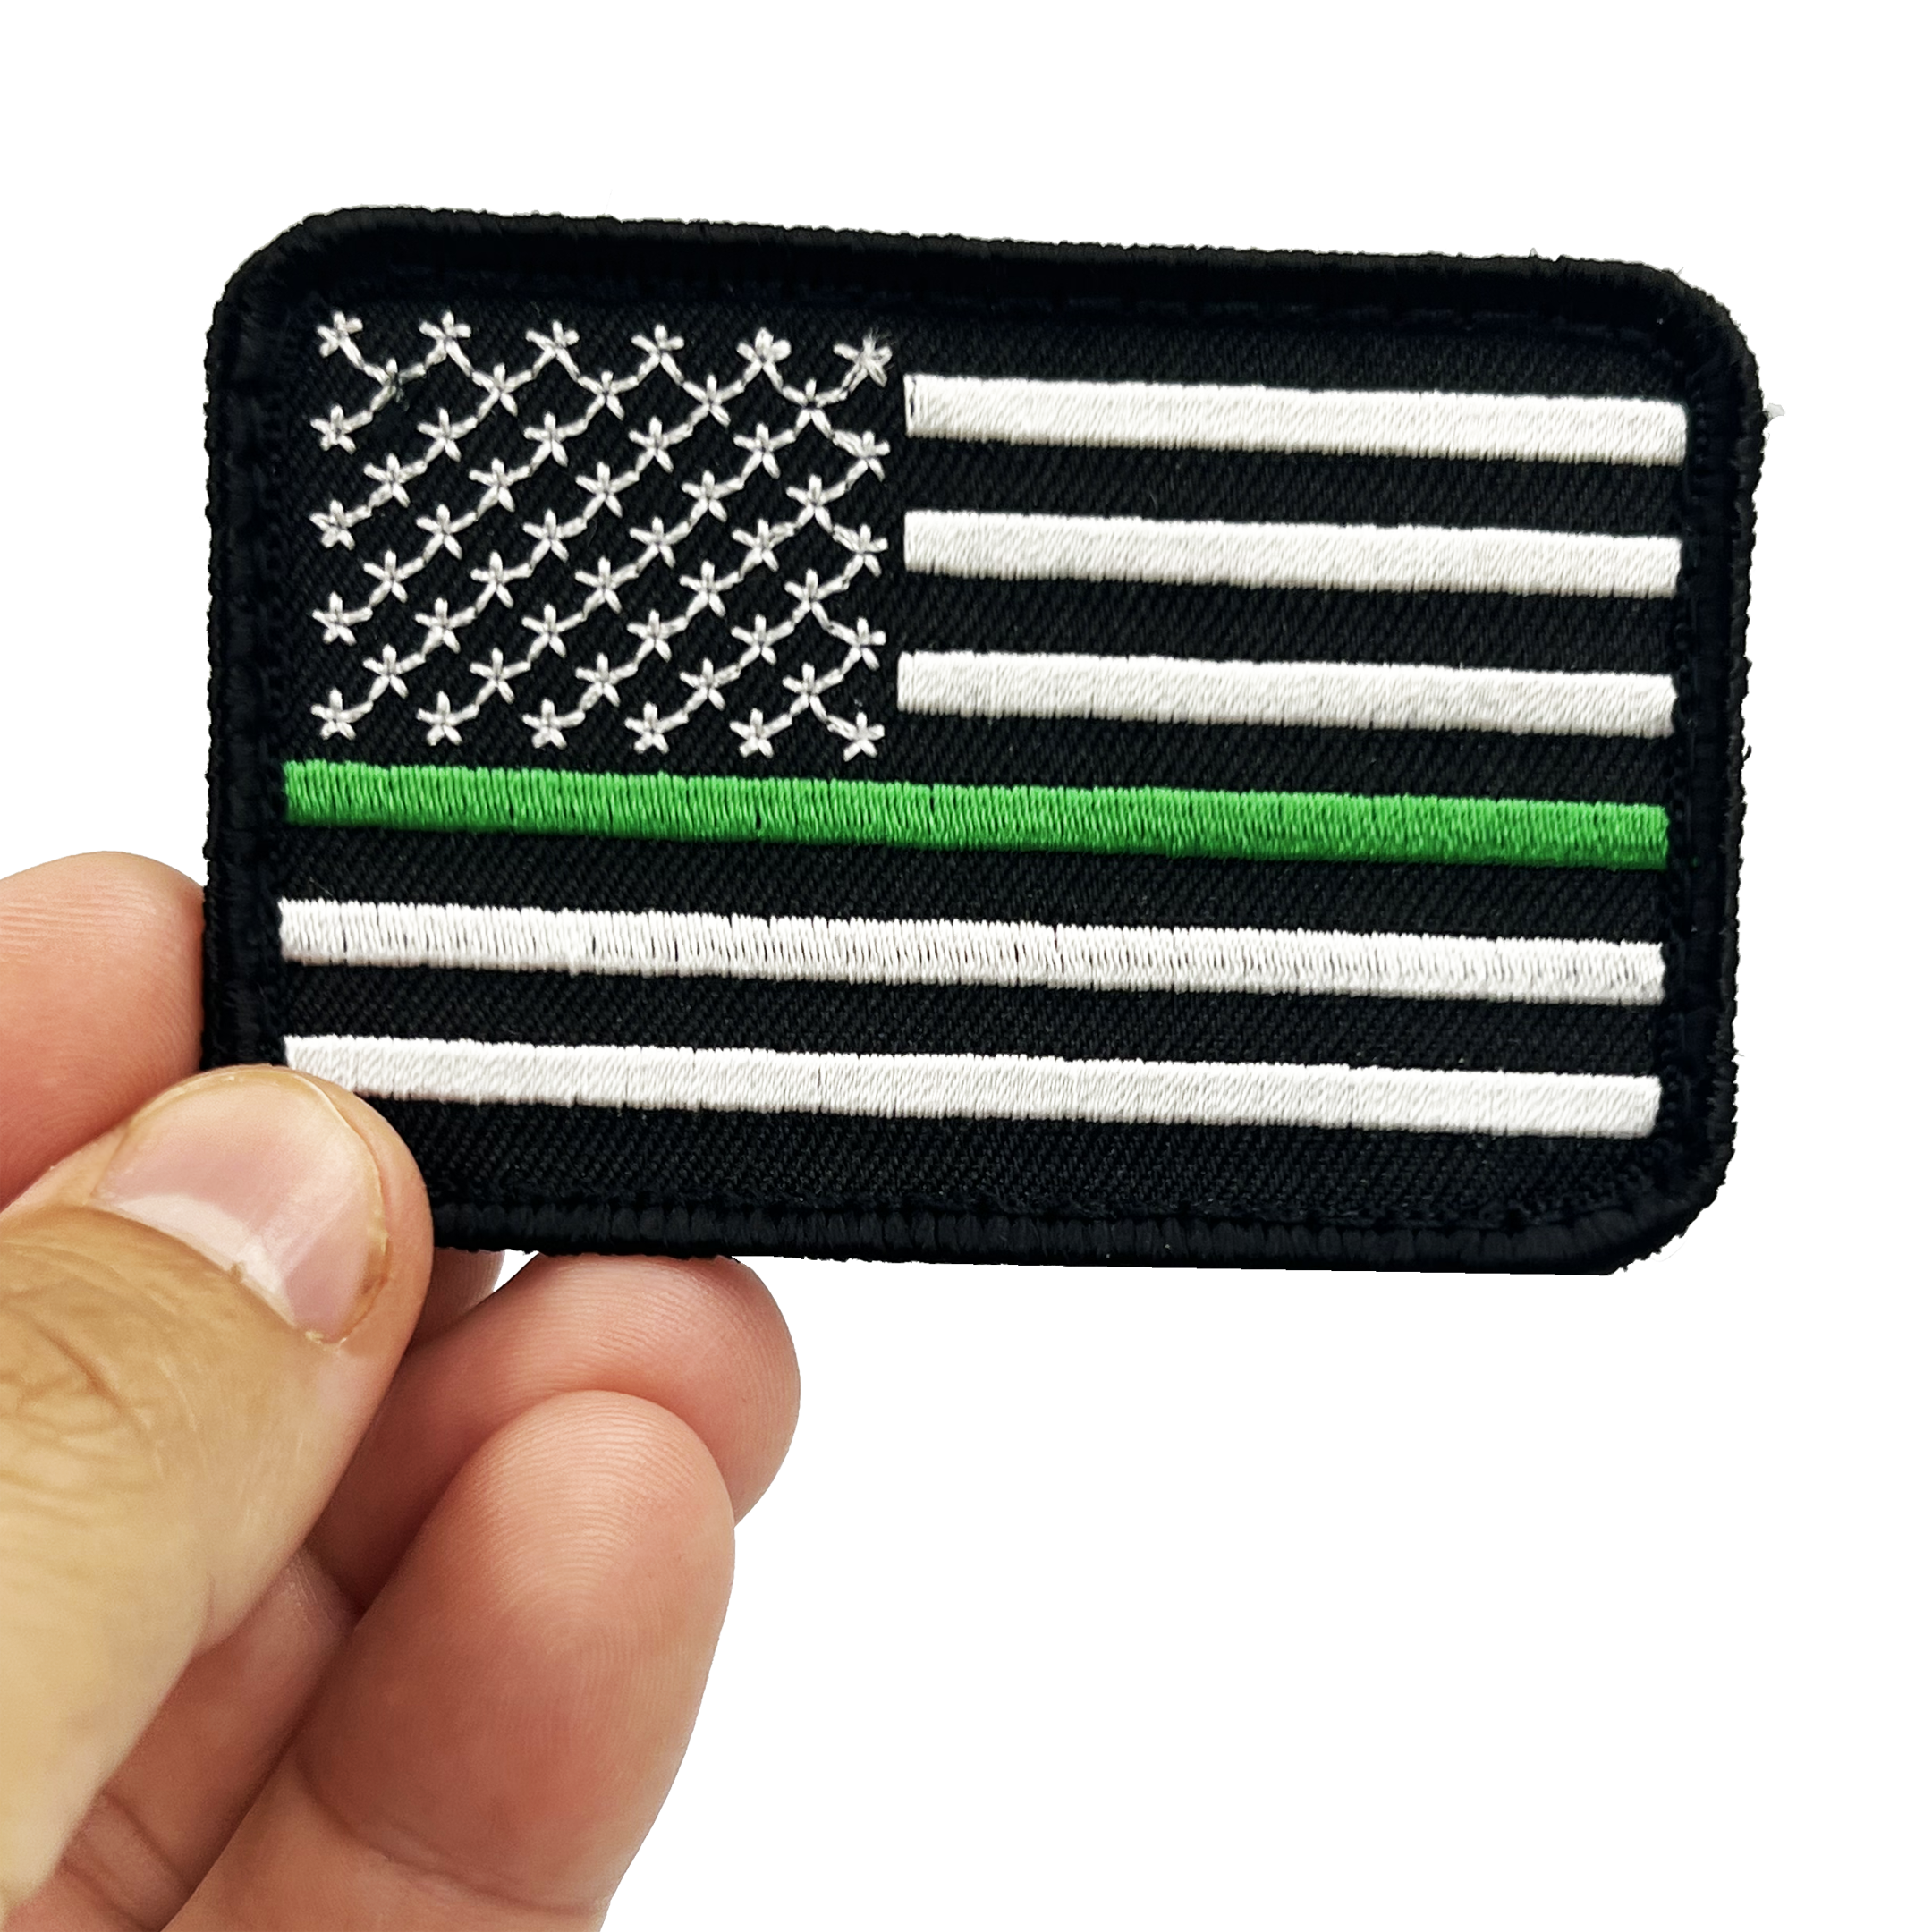 EL12-022 Thin Green Line Tactical Subdued American Flag Patch with hook and loop back embroidered Border Patrol Military